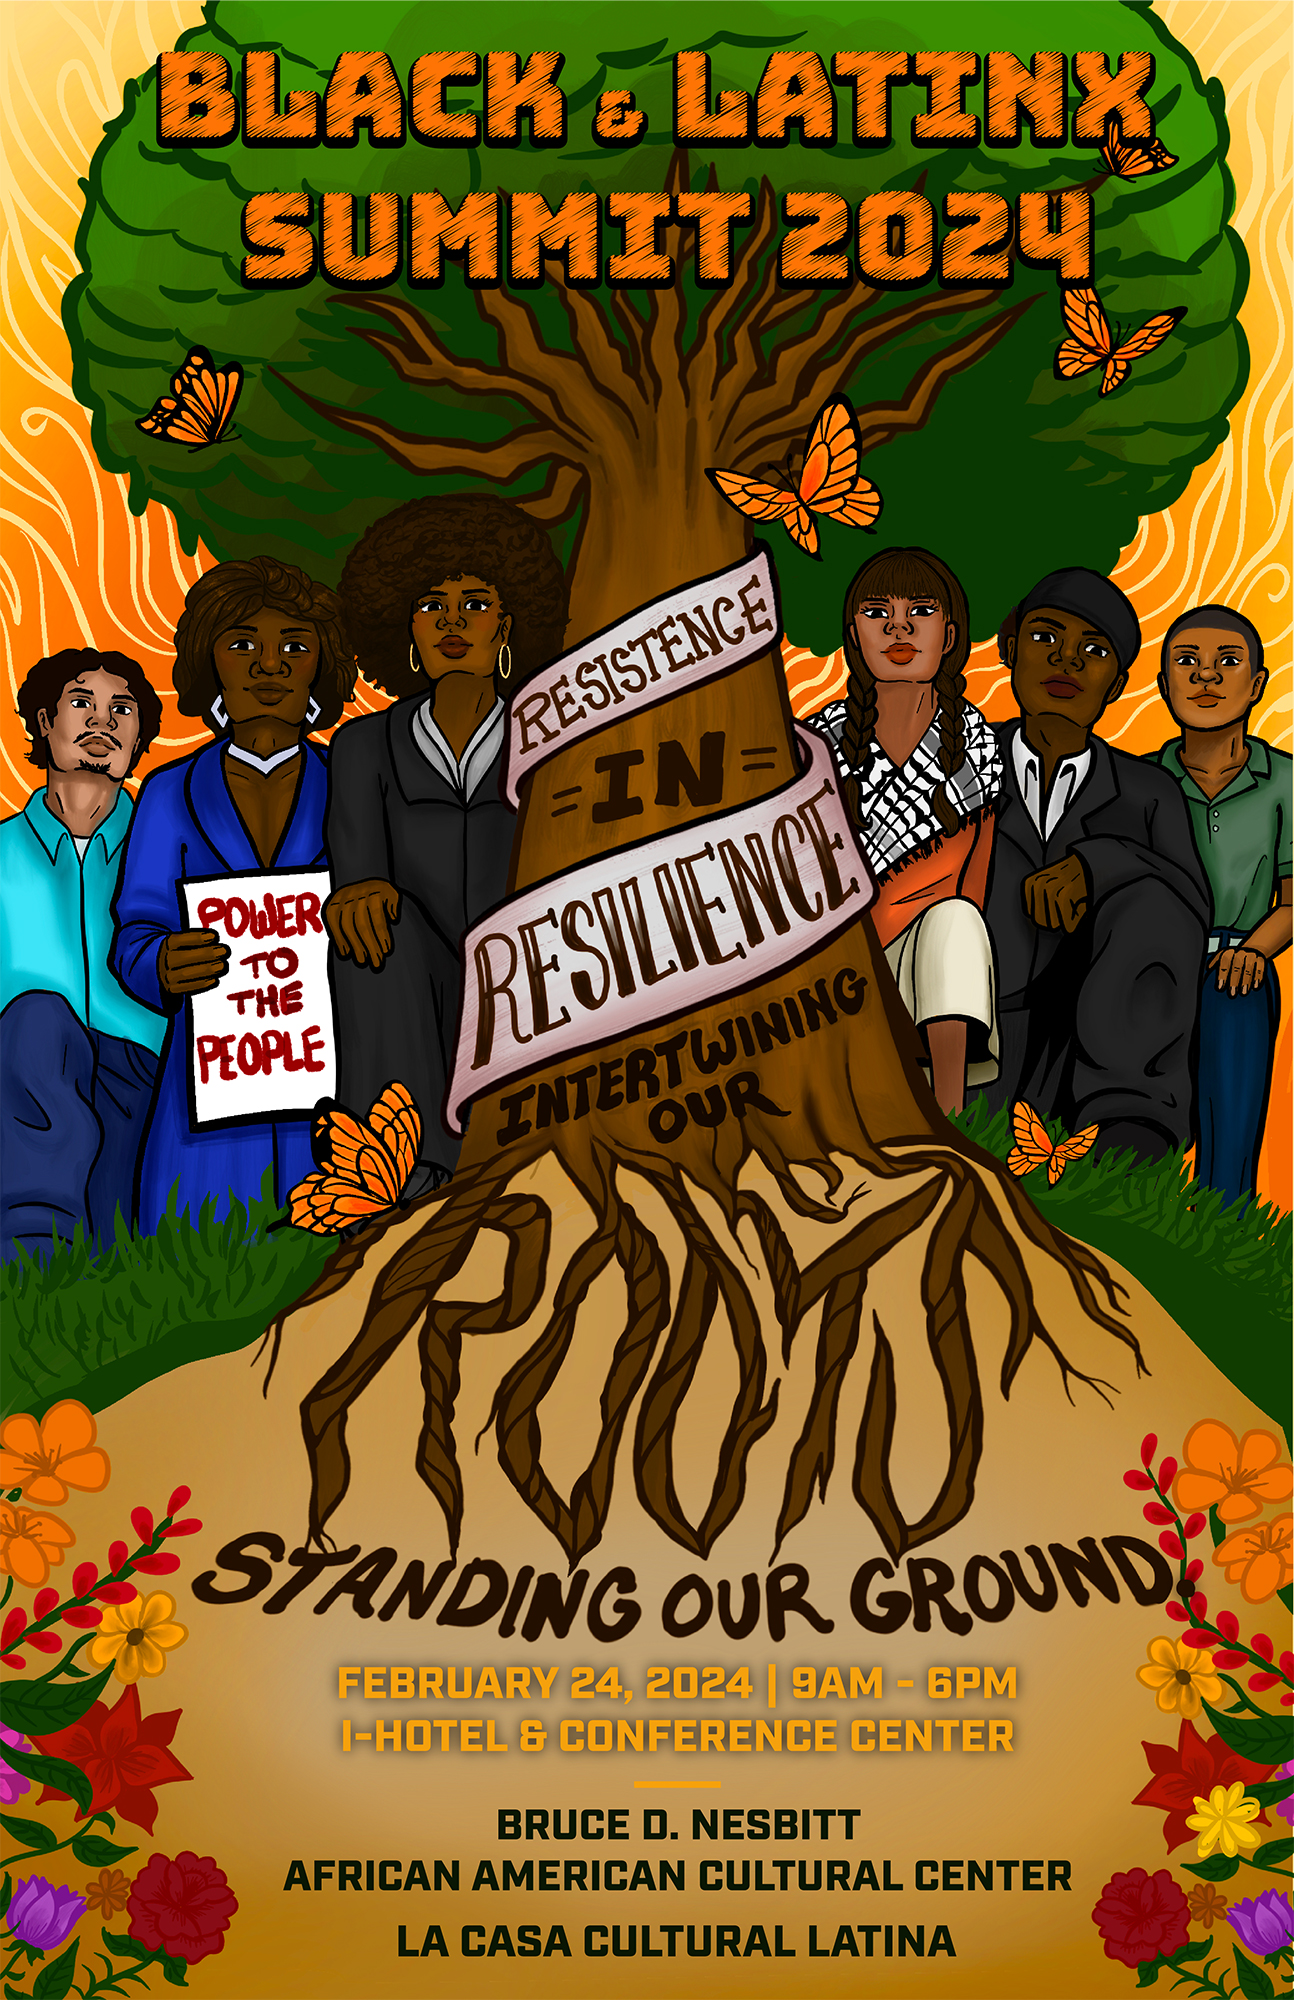 2024 poster art featuring illustration of tree growing from roots with diverse people standing on either side